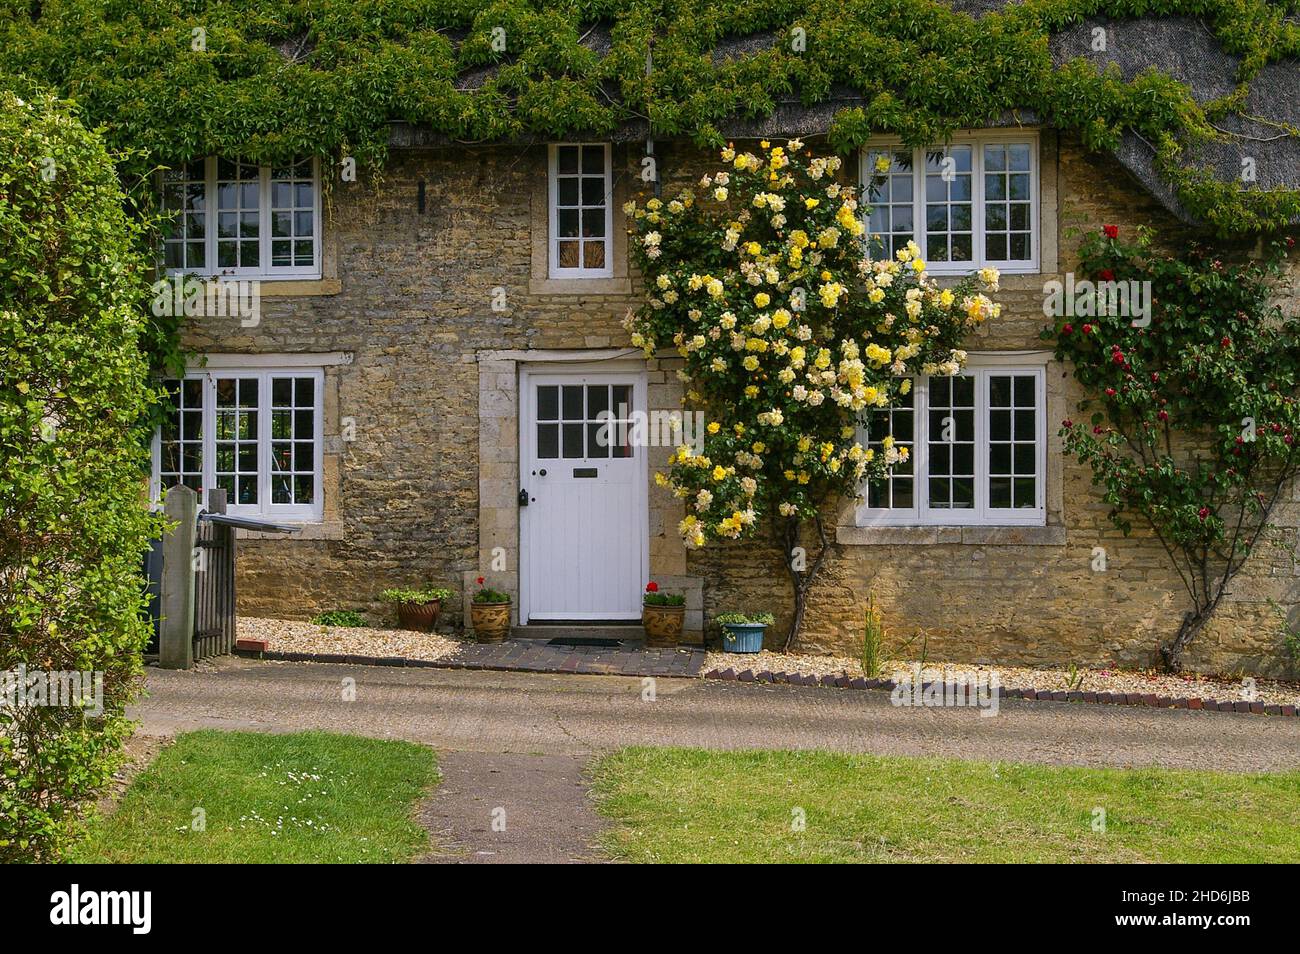 Frontage of an attractive thatched cottage with yellow roses growing around the door in the village of Grafton Underwood, Northamptonshire, UK Stock Photo